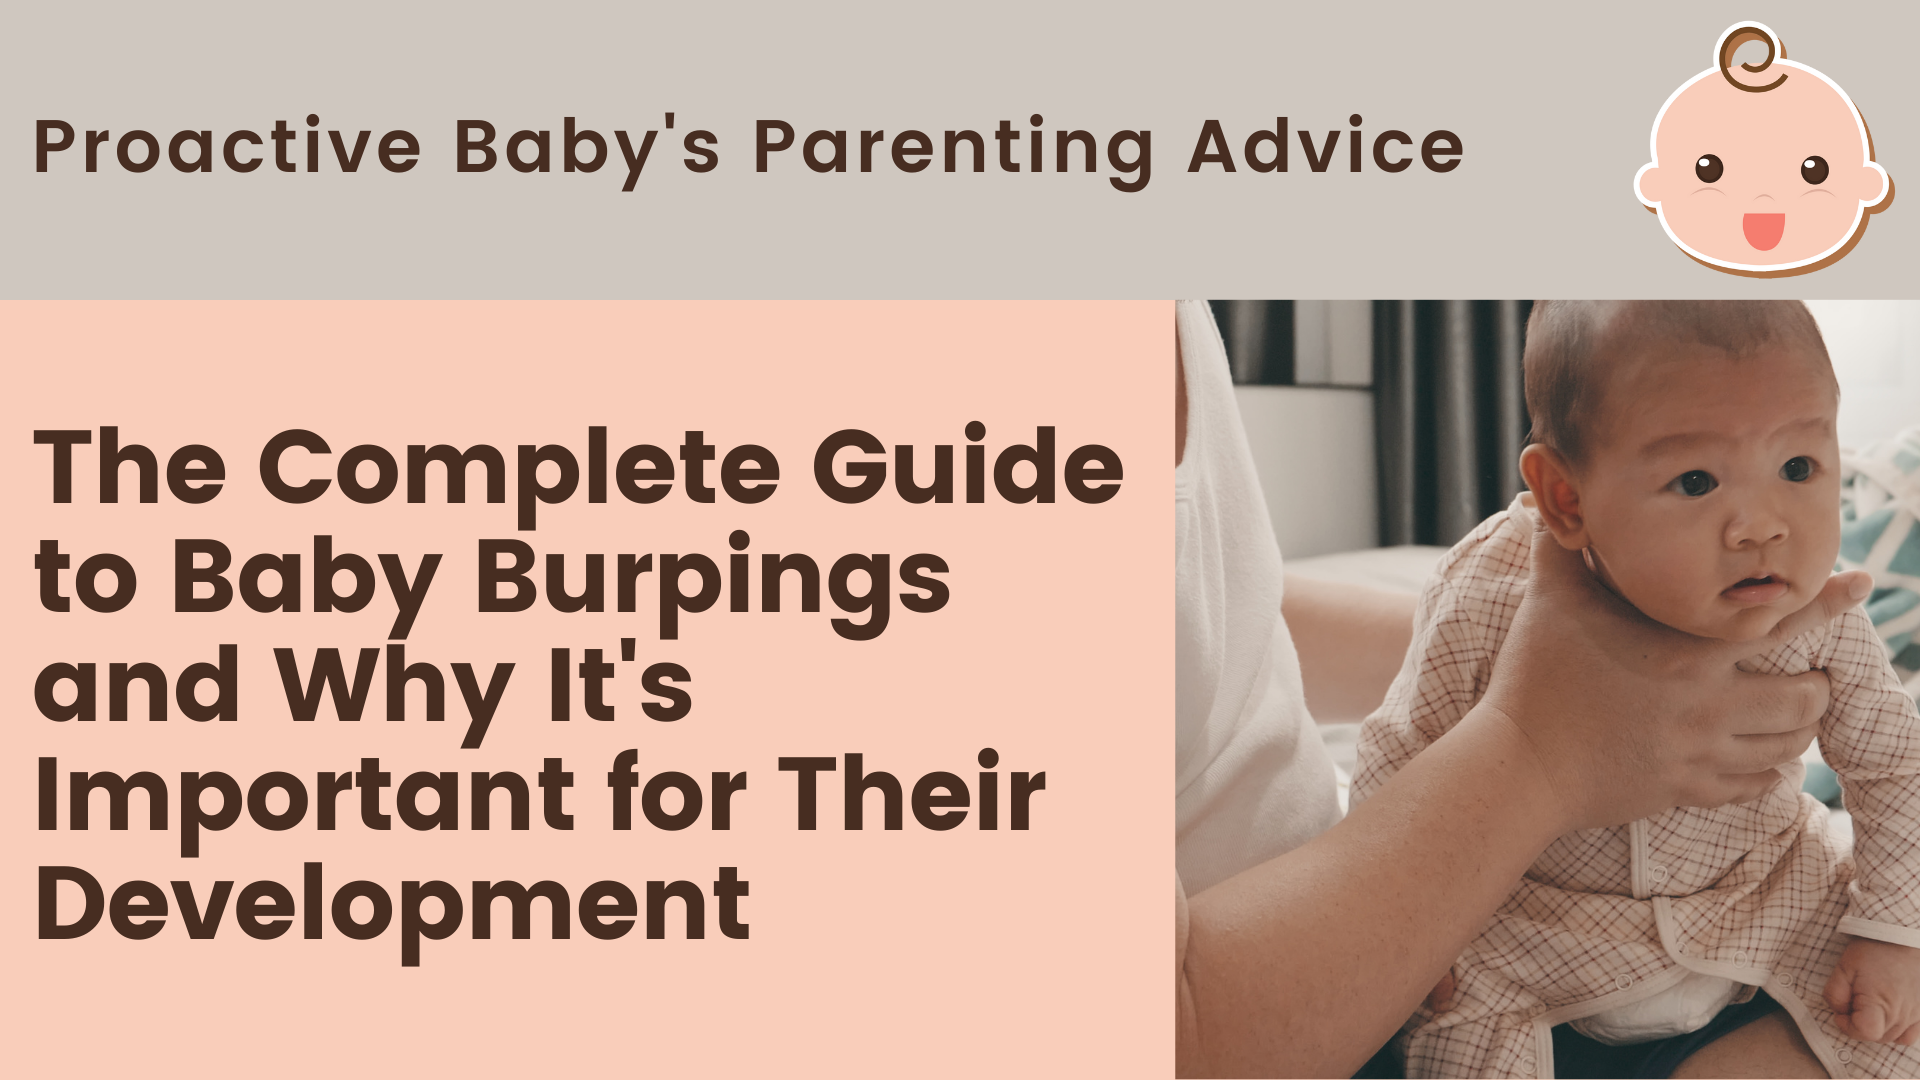 The Complete Guide to Baby Burpings and Why It's Important for Their Development